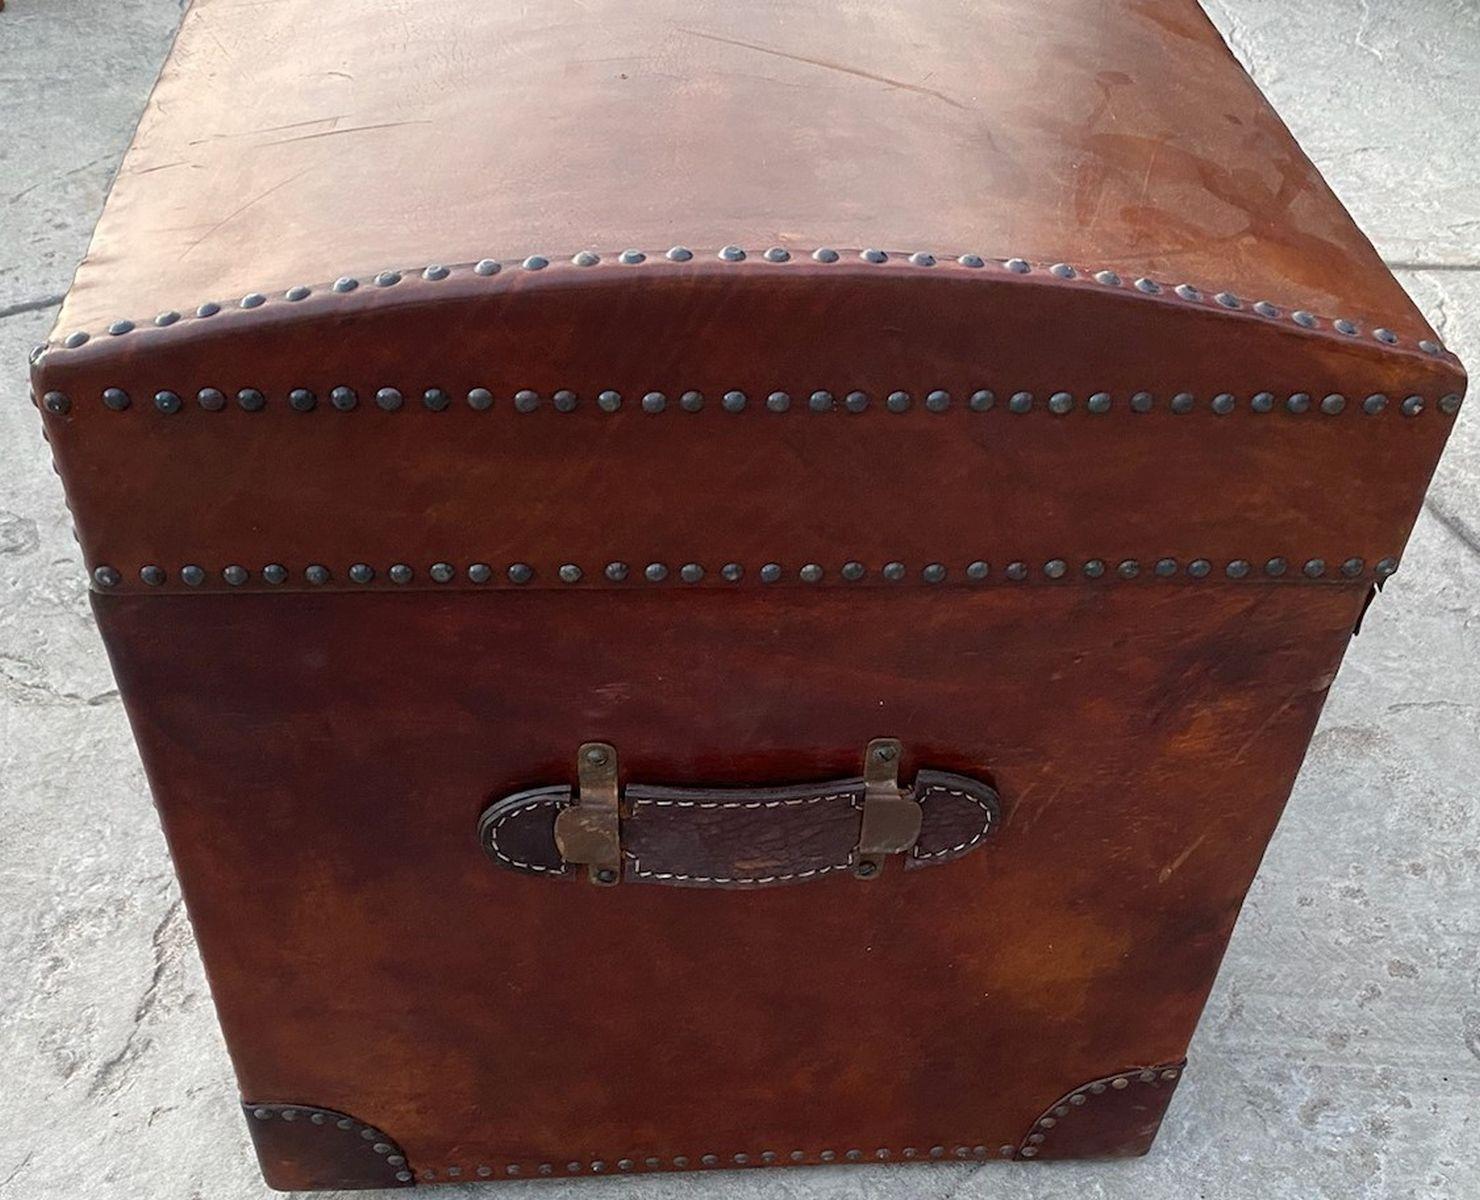 This fine handmade all leather dome top trunk with a nice wool grey flannel liner. This is in fine condition and sturdy.